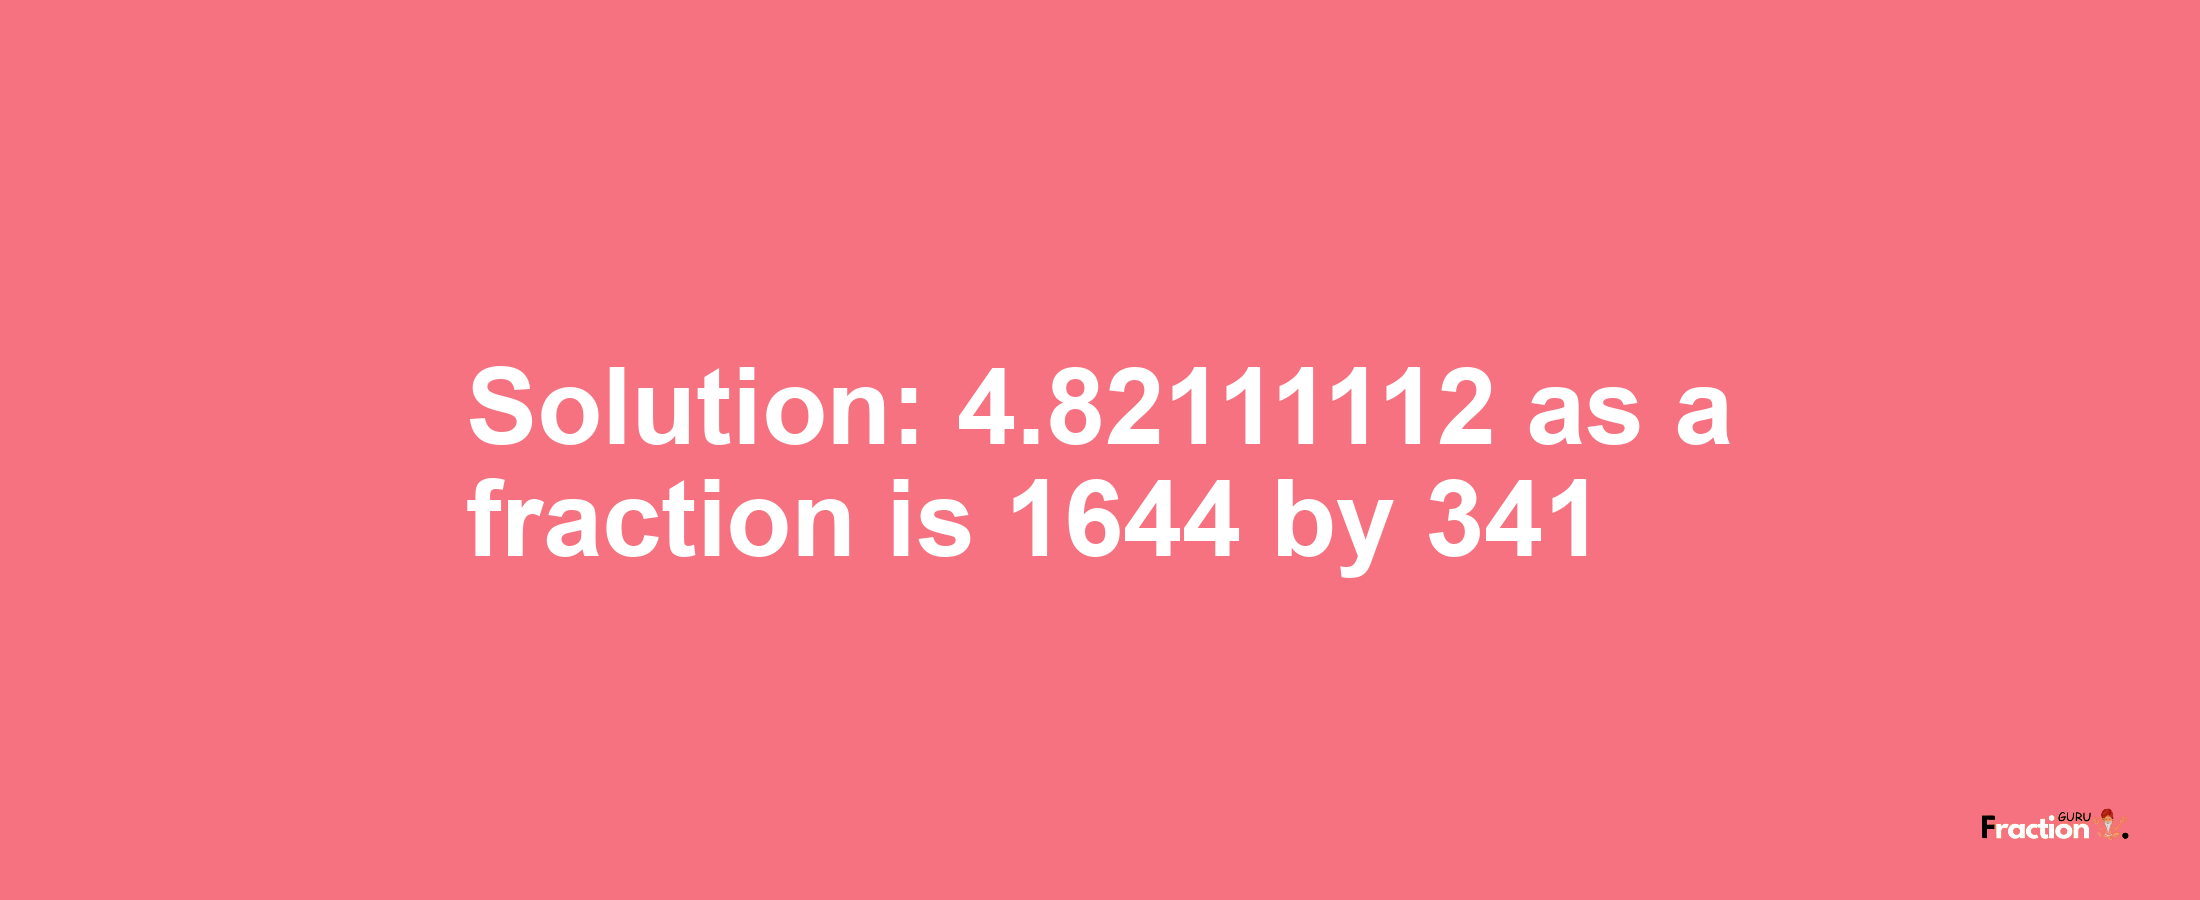 Solution:4.82111112 as a fraction is 1644/341